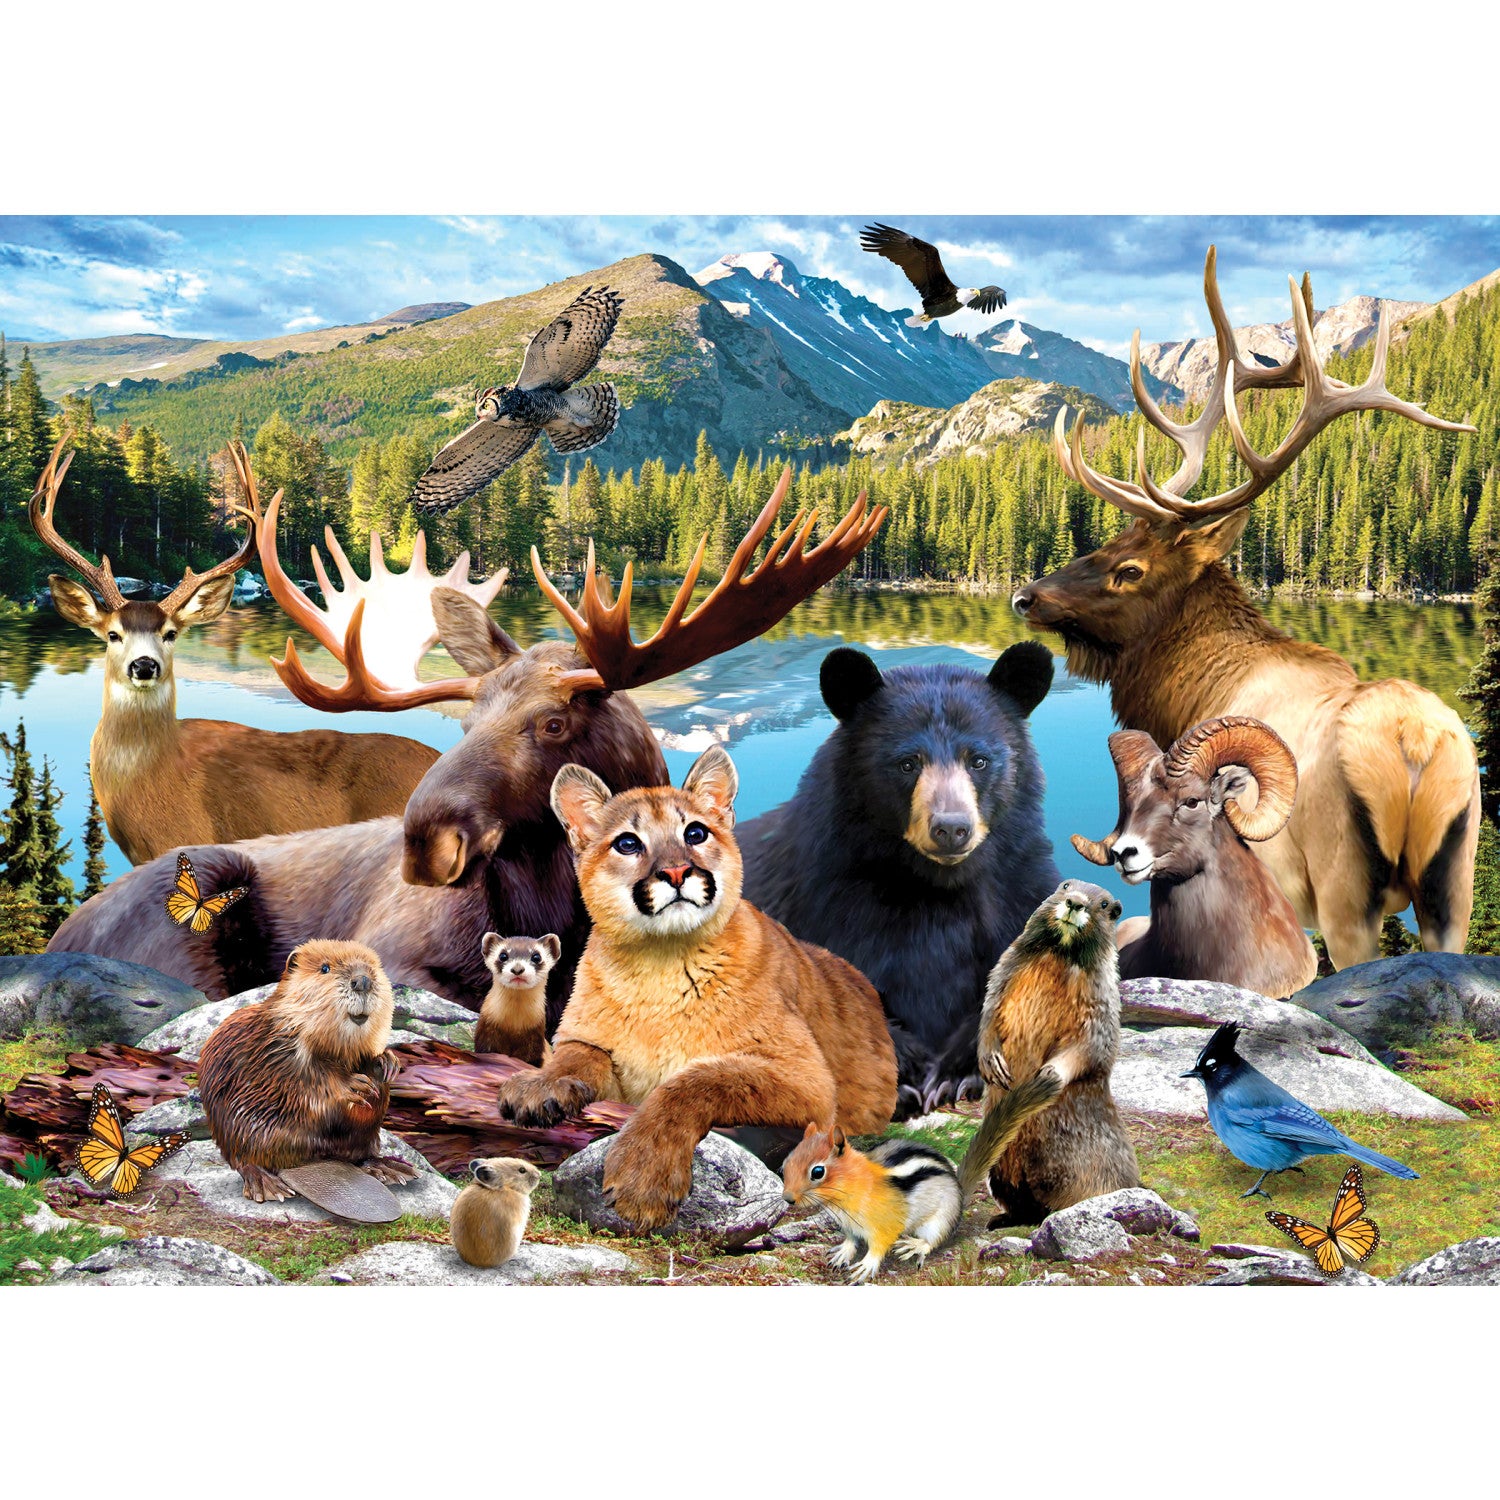 National Parks - Rocky Mountain 500 Piece Puzzle